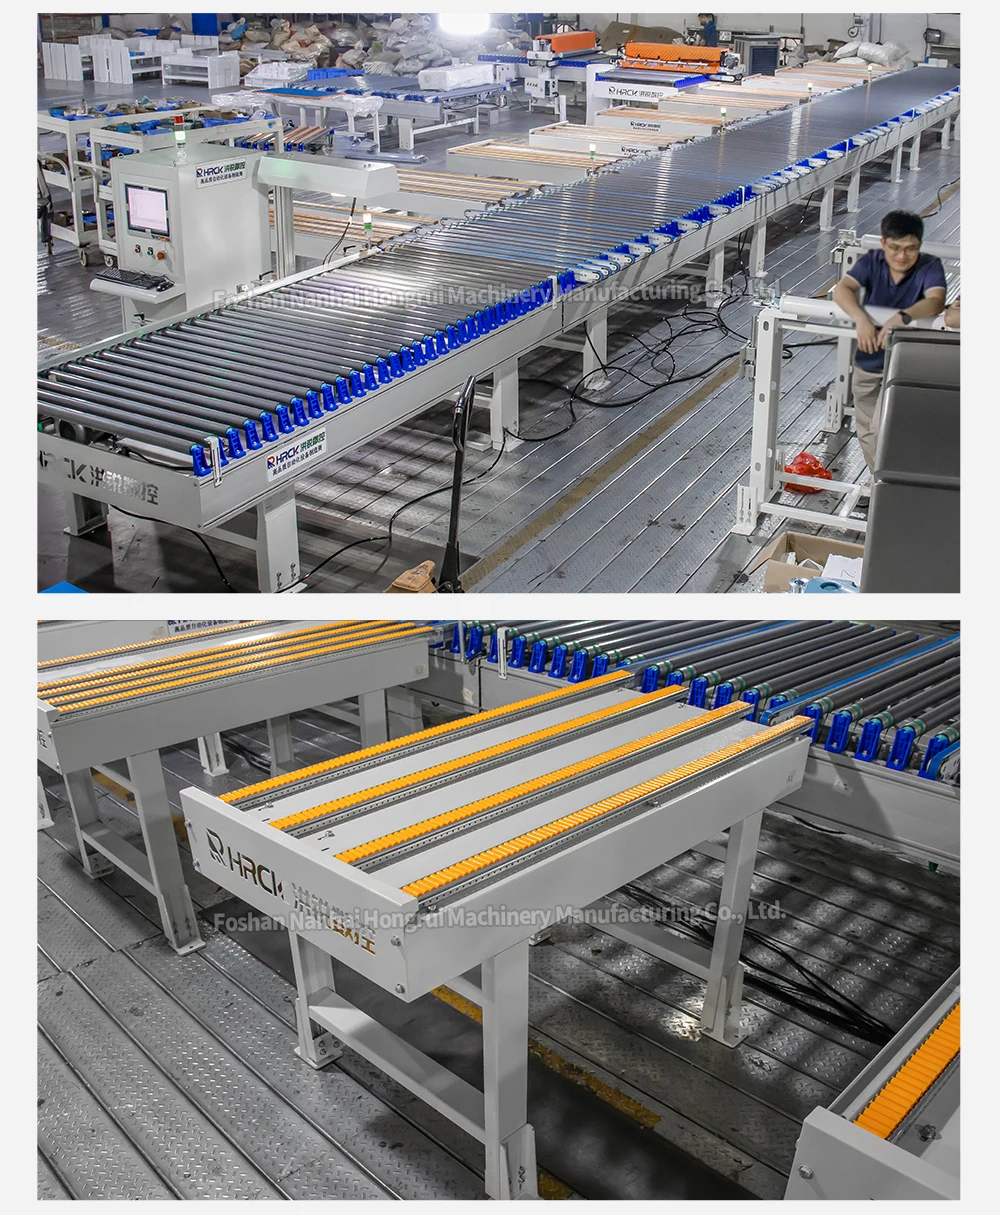 Panel furniture wiring, intelligent sorting, packaging production line, super labor-saving intelligent sorting manufacture